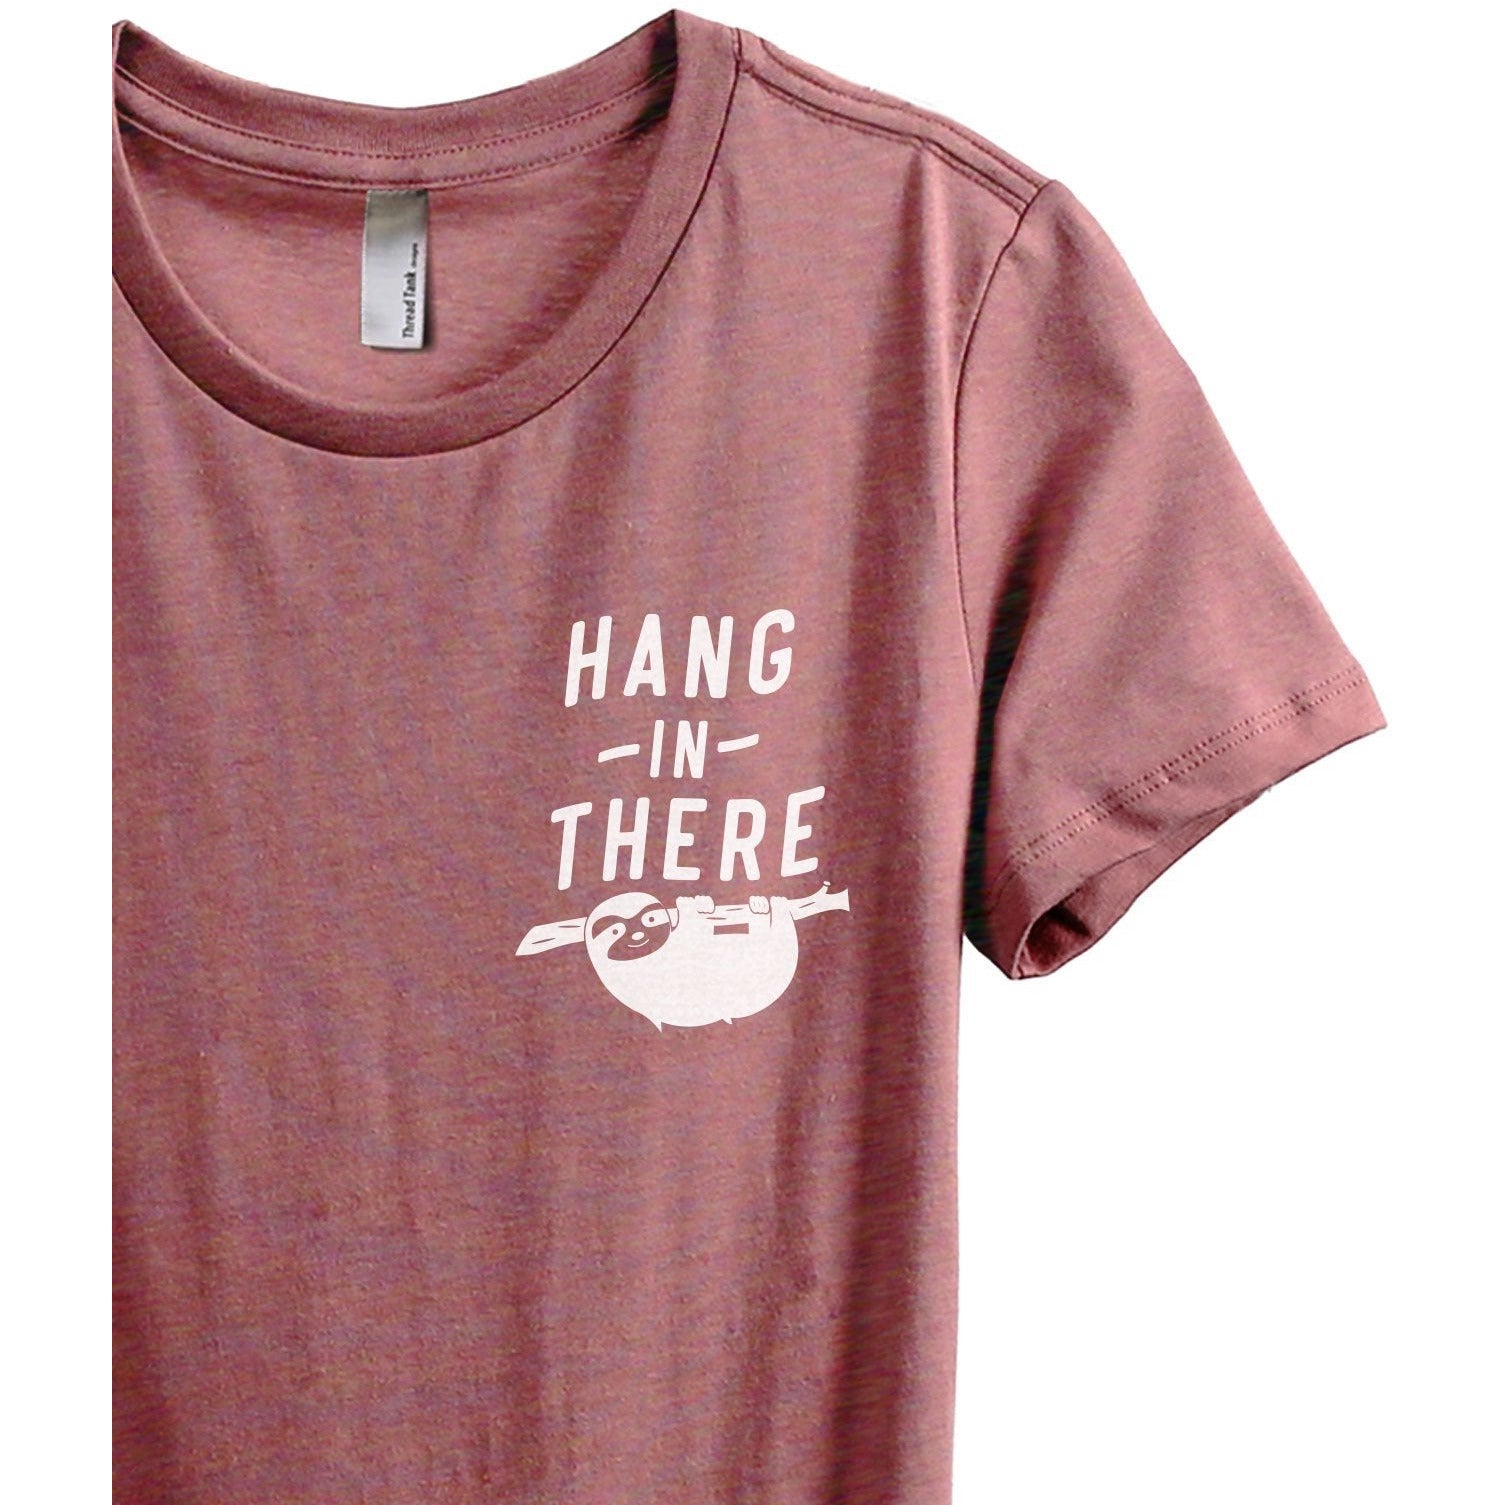 Hang In There Women's Relaxed Crewneck T-Shirt Top Tee Heather Rouge Zoom Details
